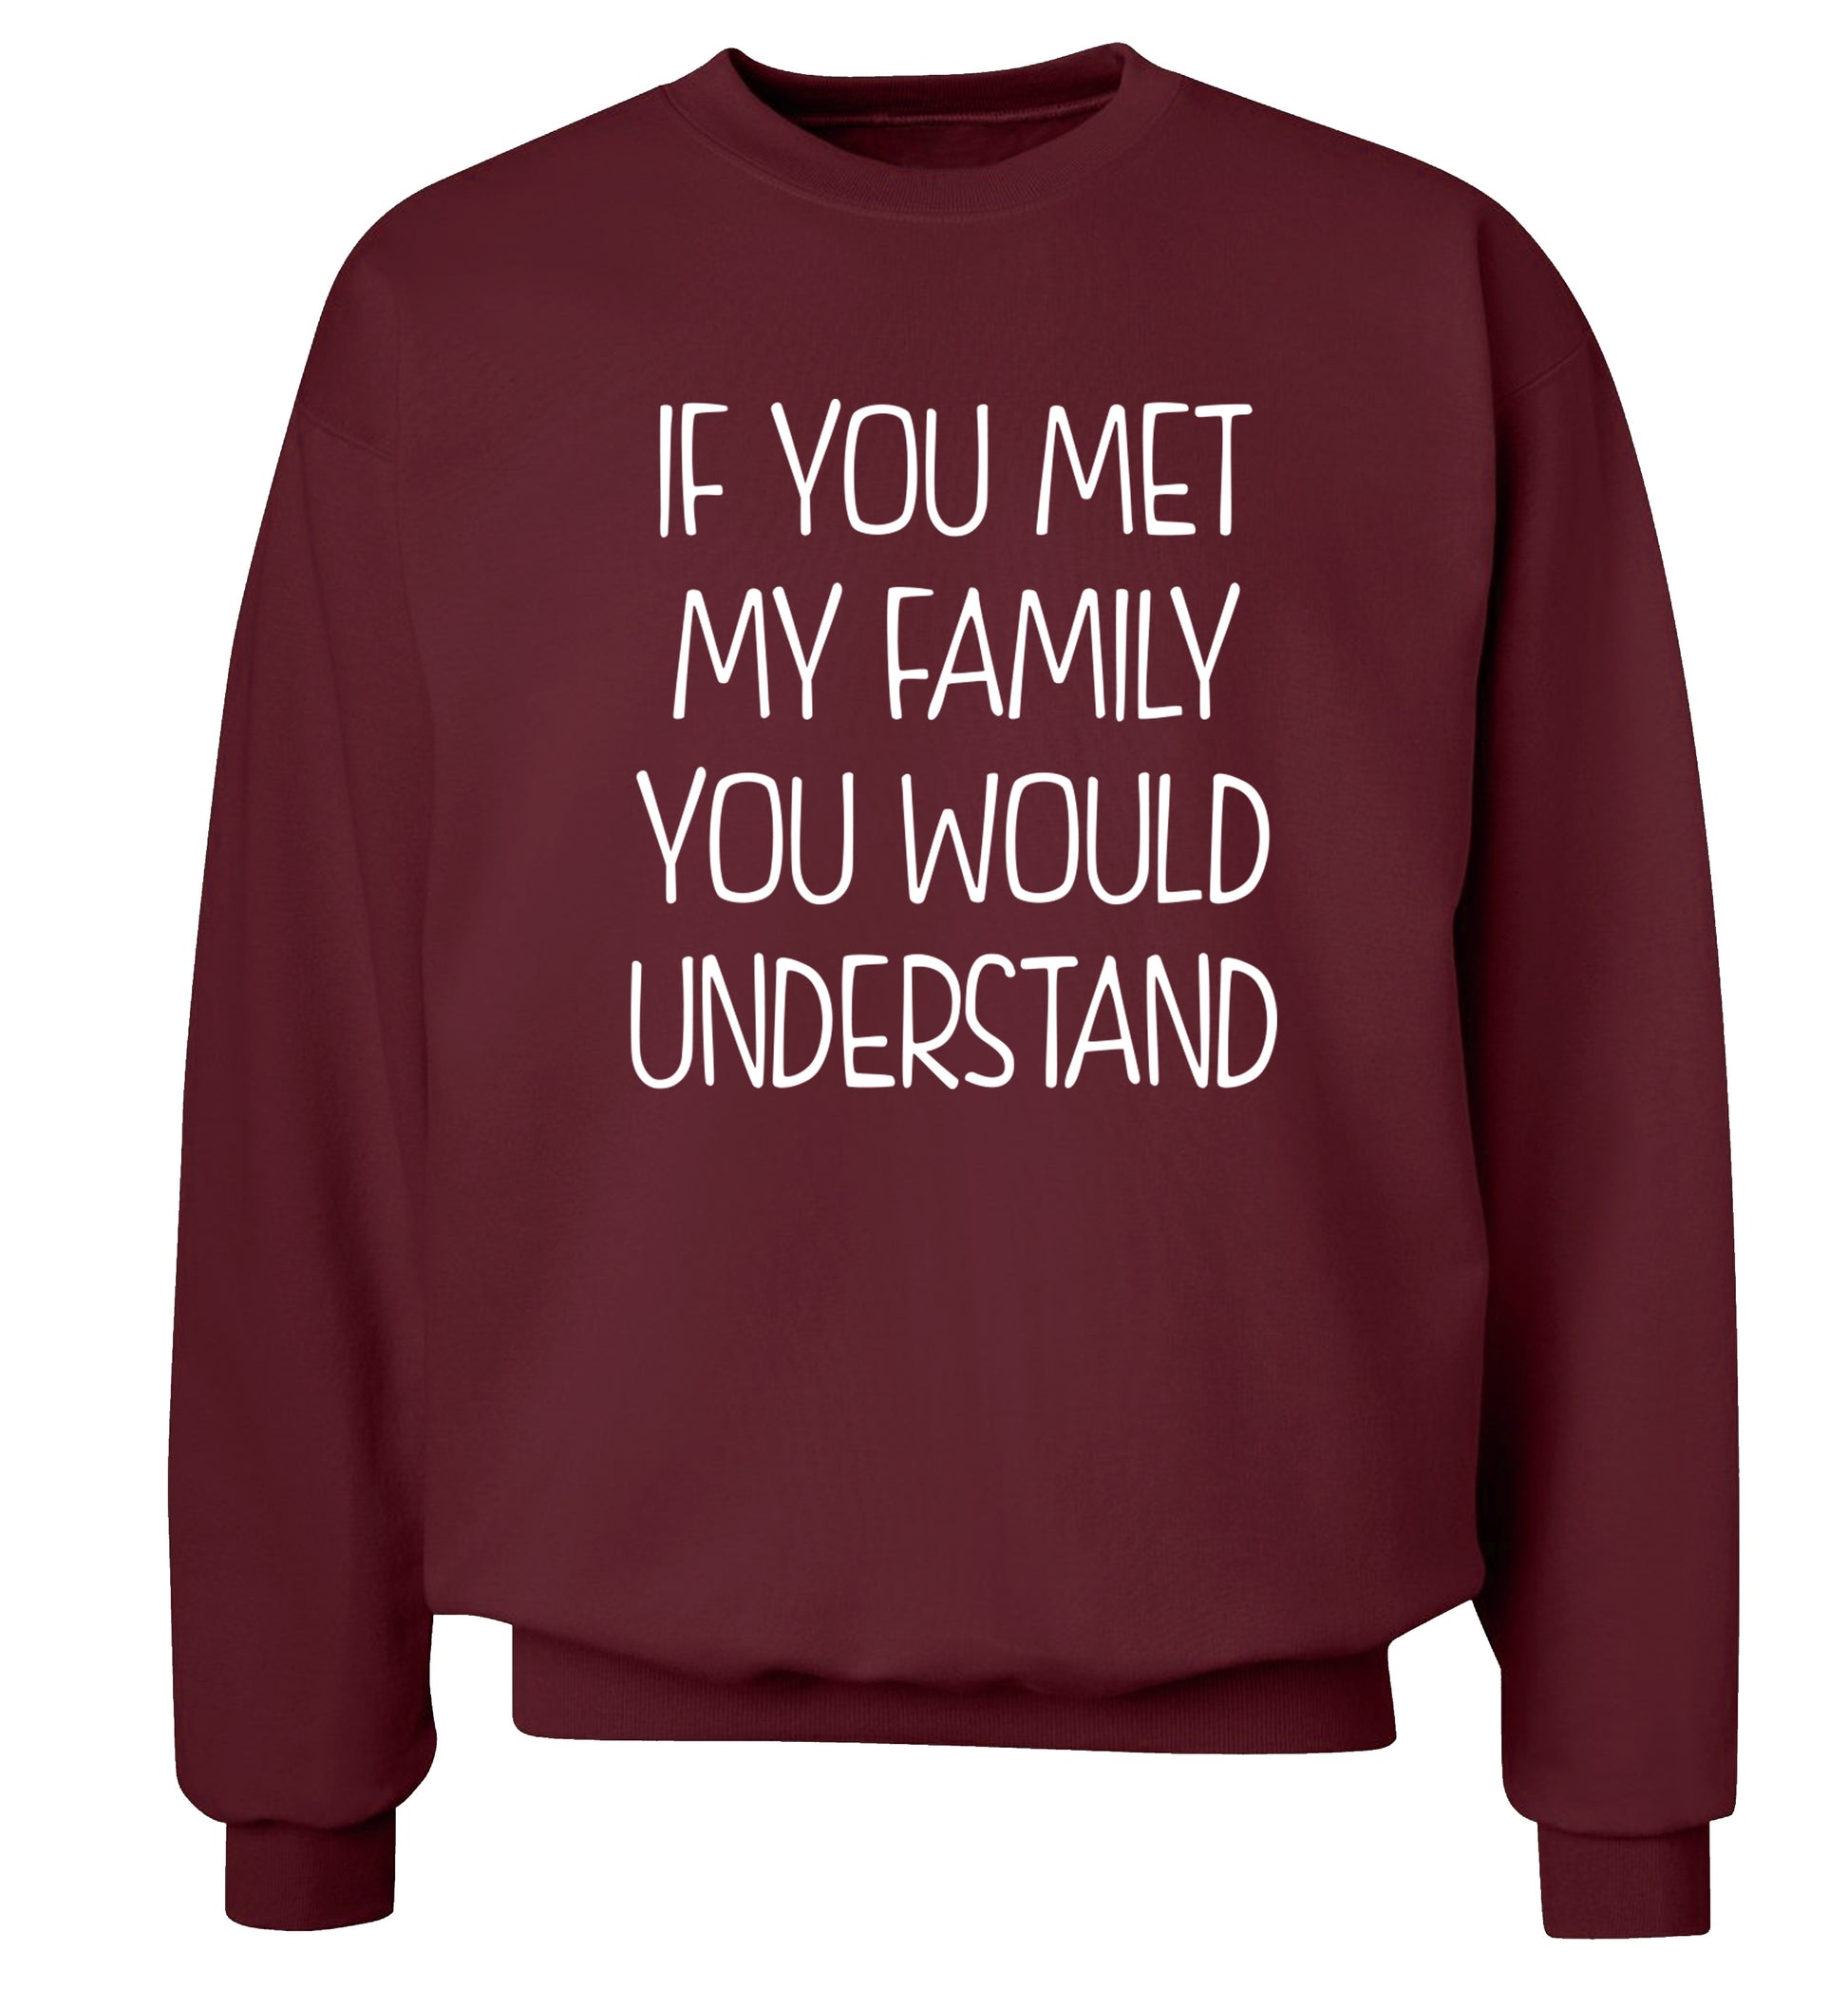 If you met my family you would understand Adult's unisex maroon Sweater 2XL